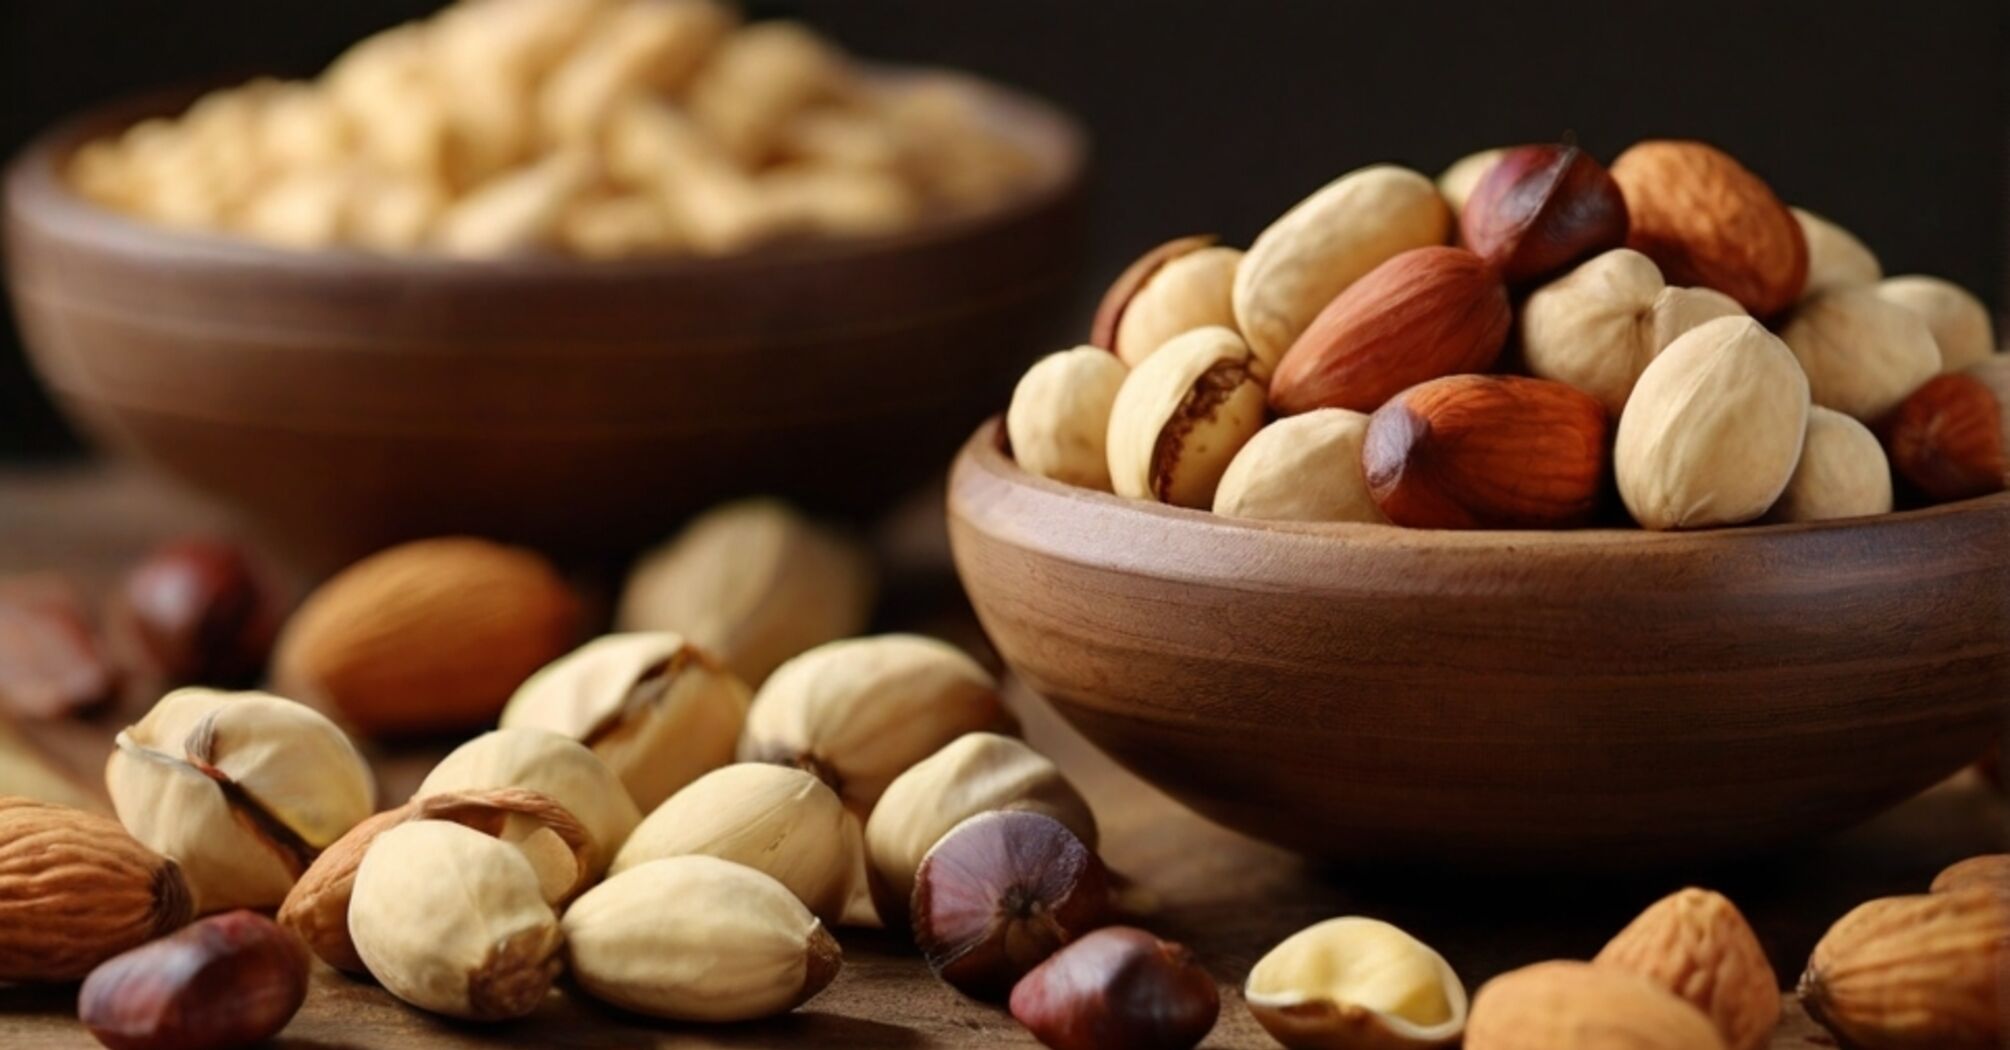 Why soak nuts and legumes before eating